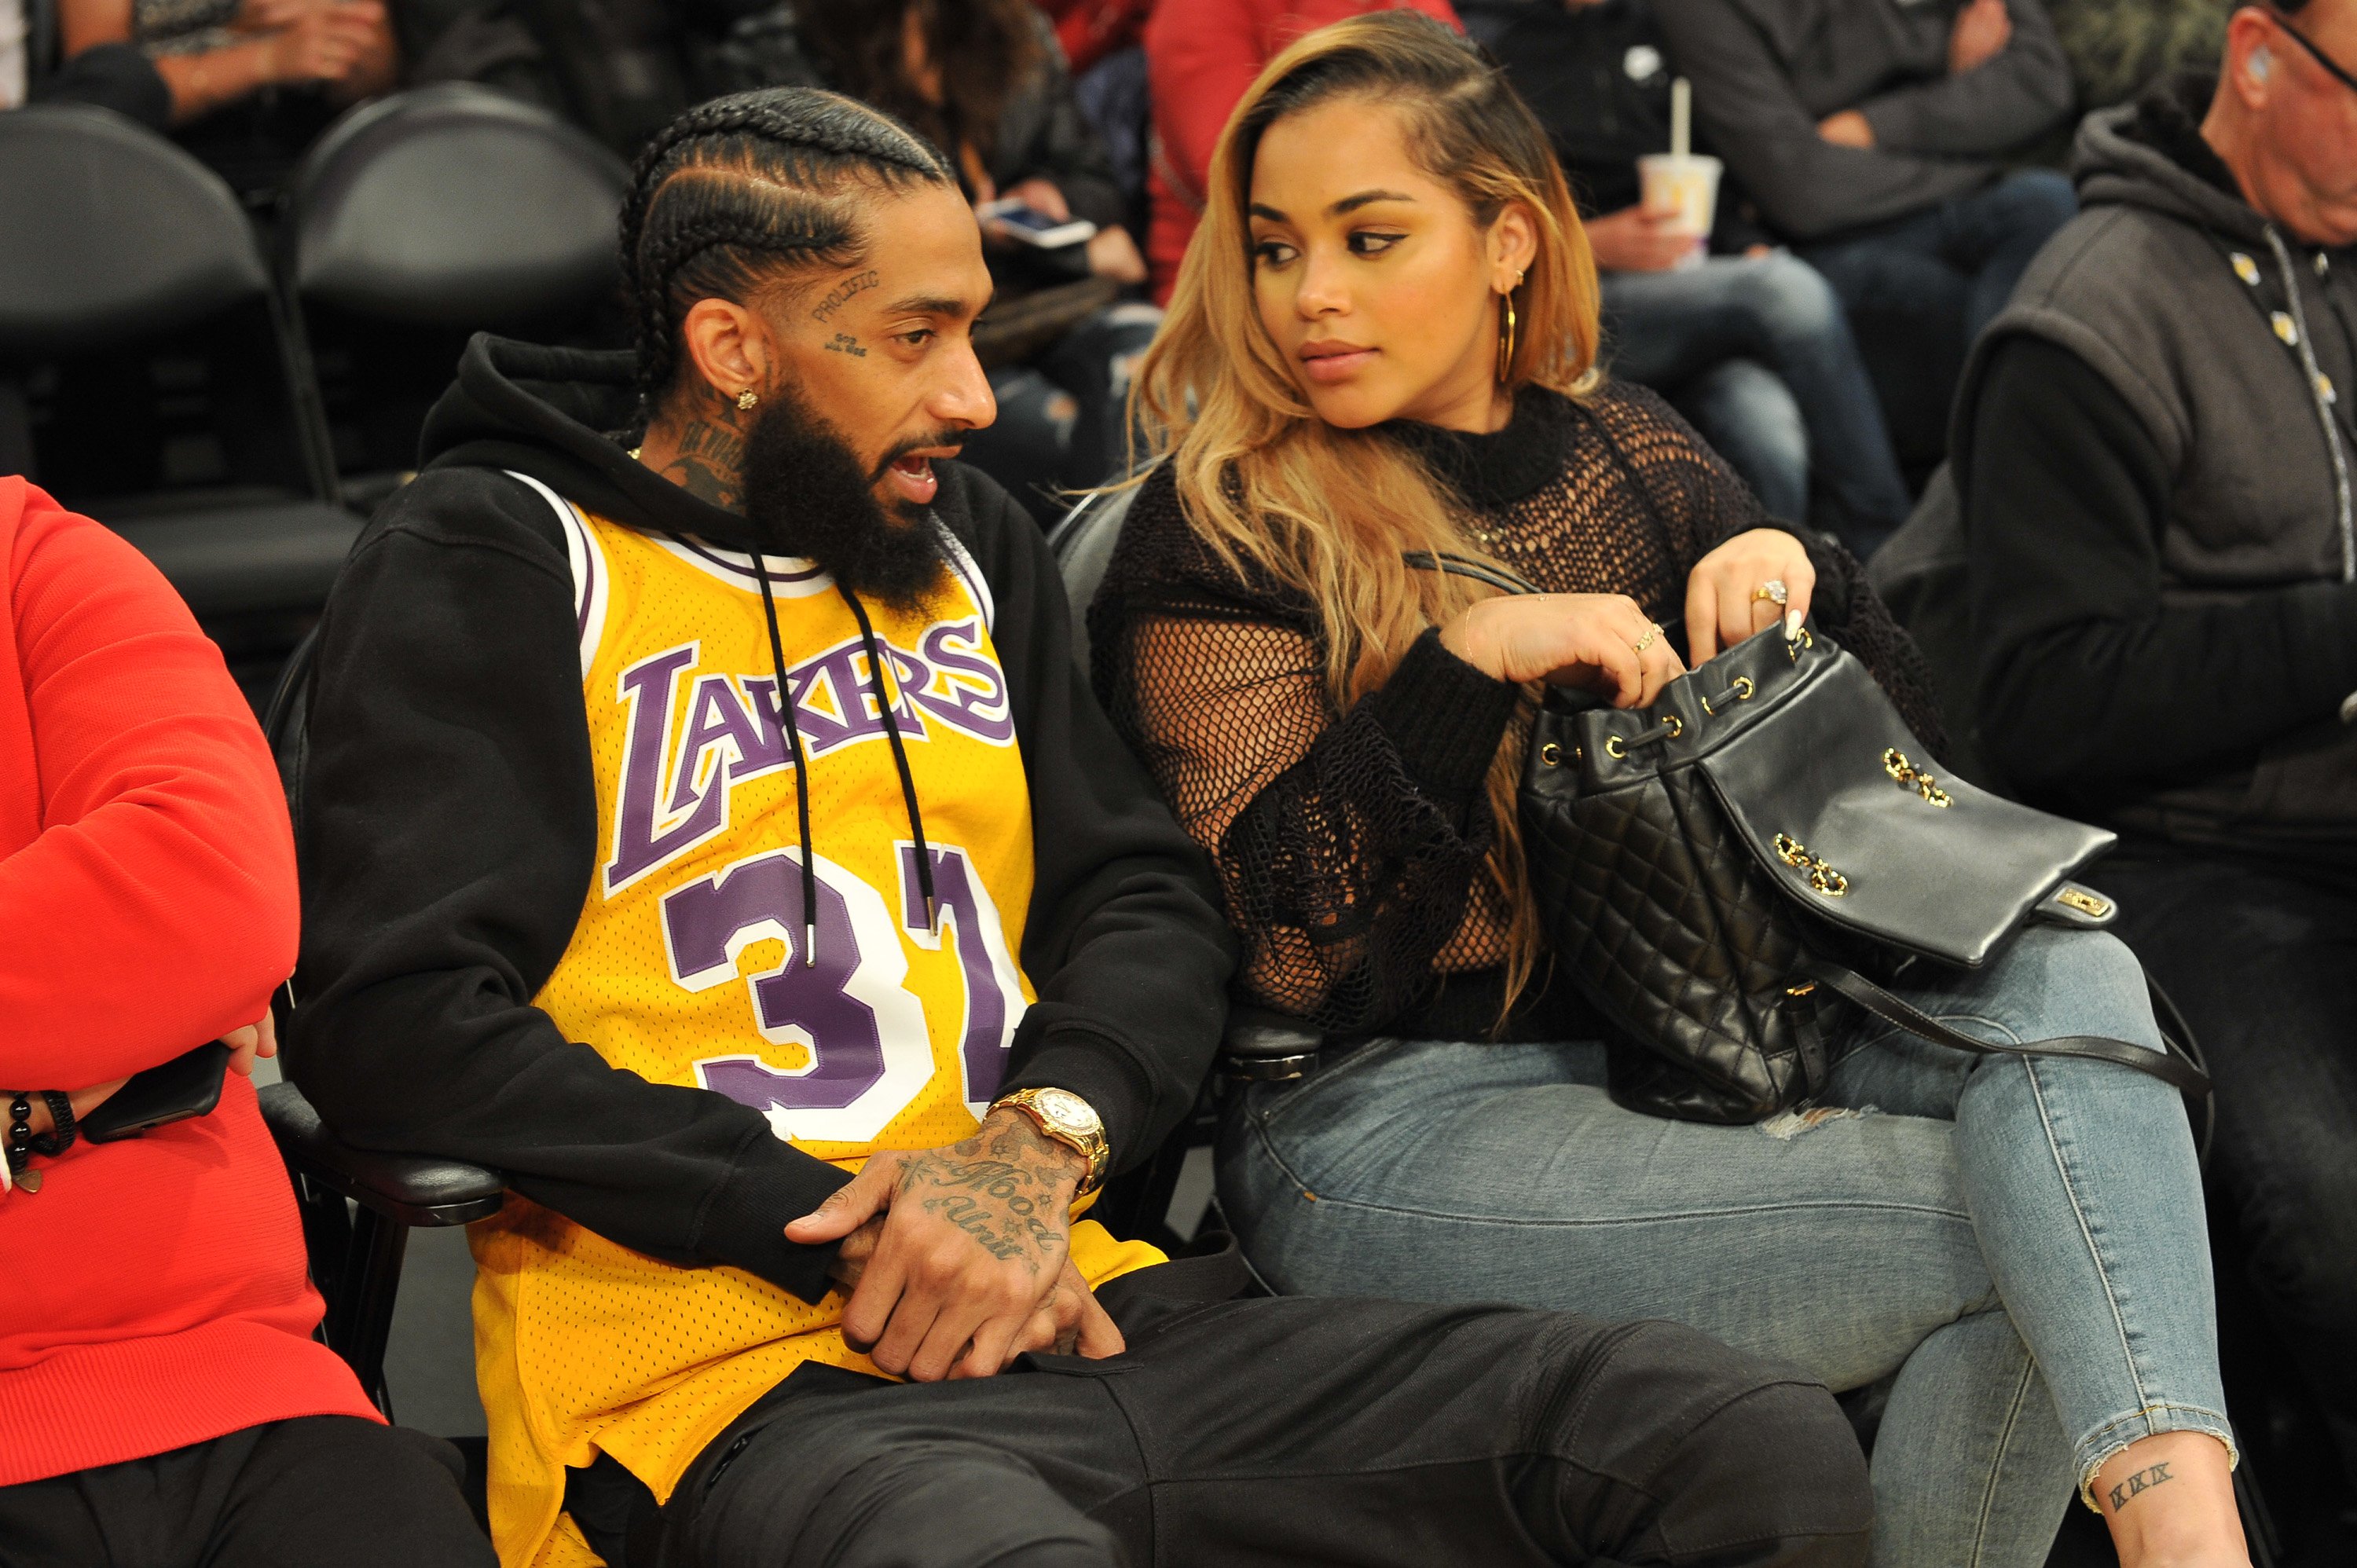 Nipsey Hussle and Lauren London at a basketball game between the Los Angeles Lakers and the Minnesota Timberwolves on December 25, 2017, in Los Angeles, California. | Source: Getty Images